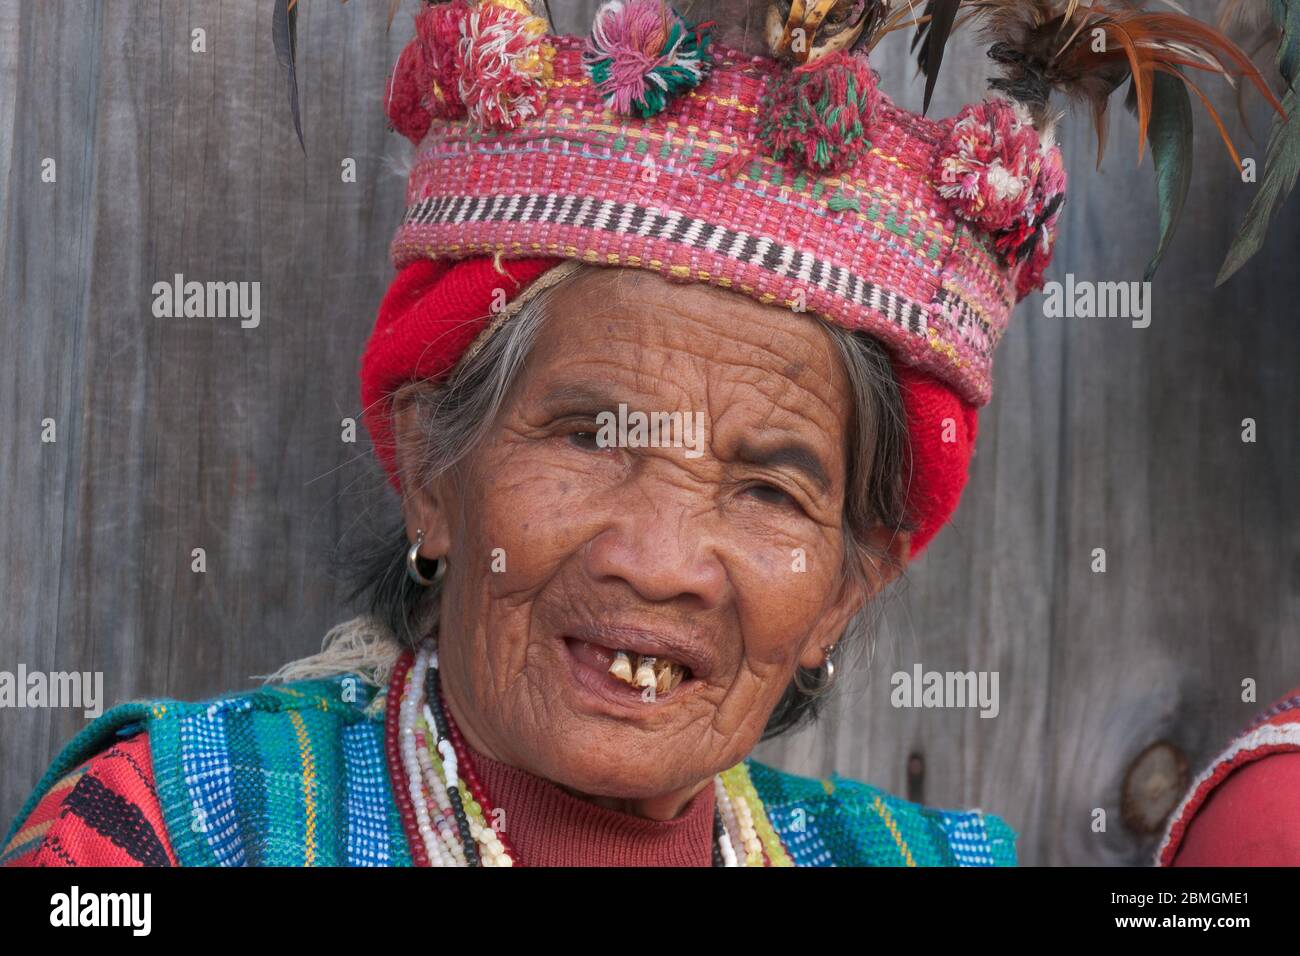 Banaue, Philippines - February 2012: Elder woman in traditional clothes sitting in front of a wooden wall Stock Photo